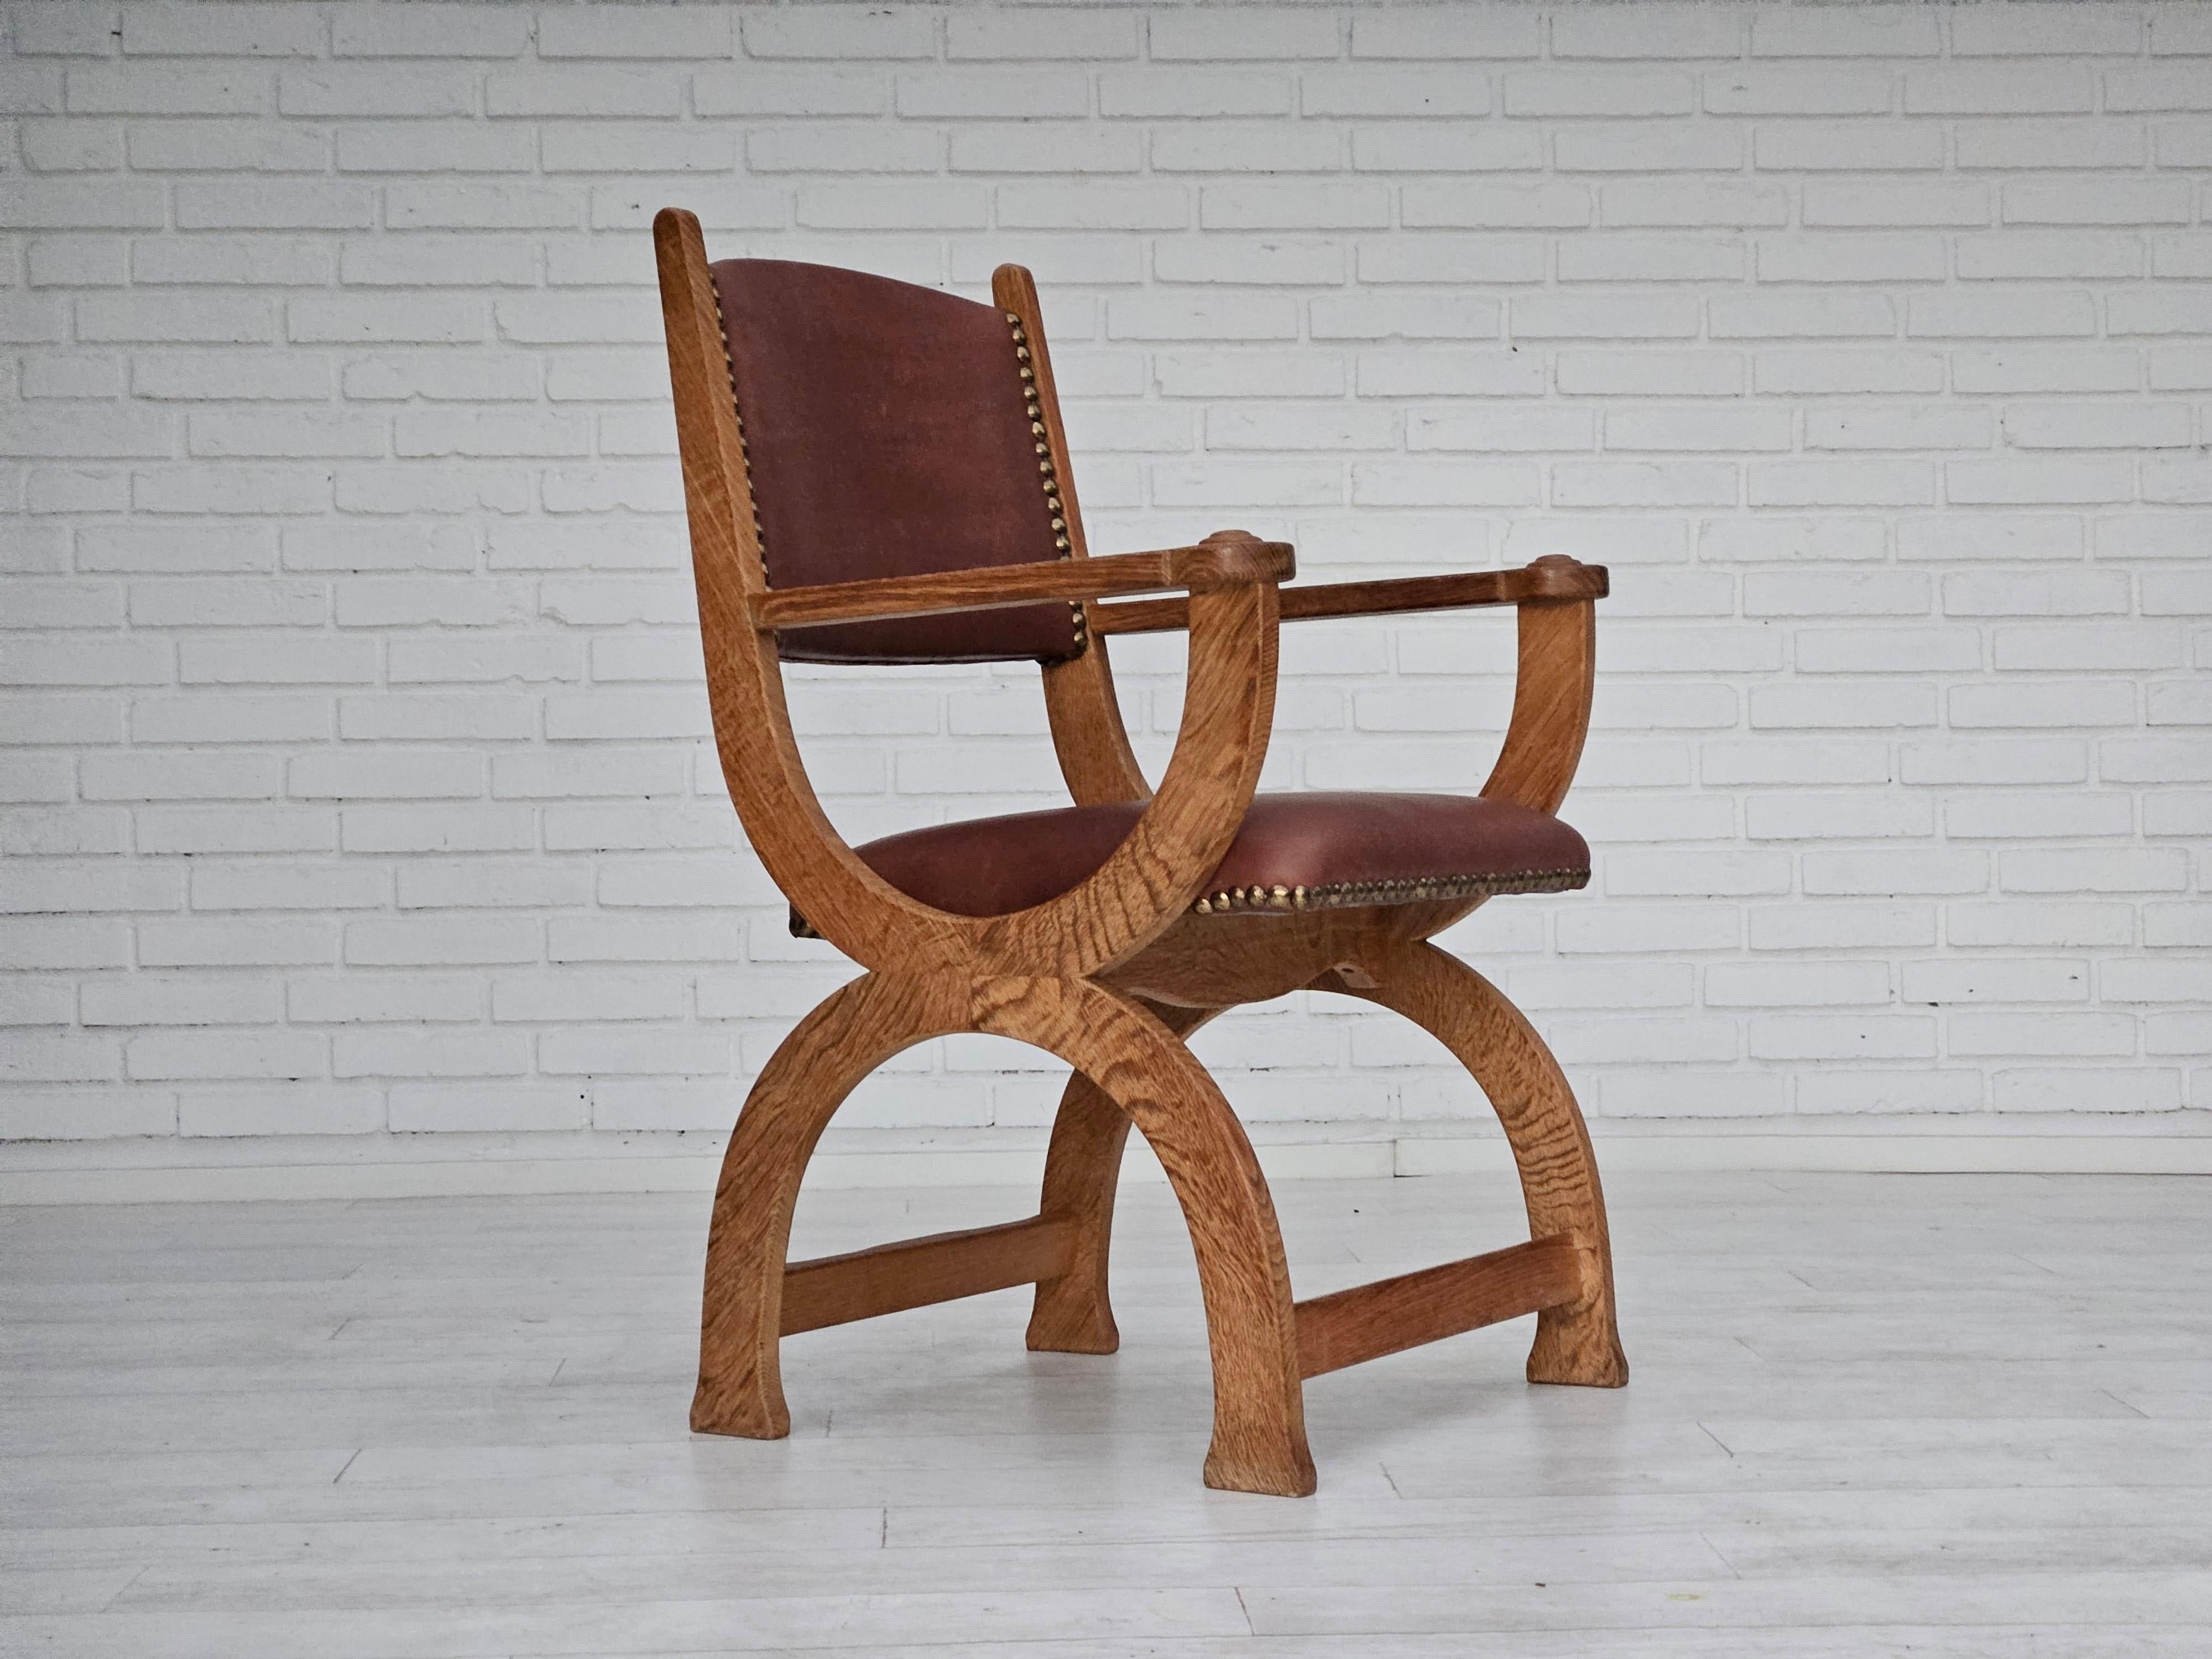 1950s, Danish design. Reupholstered armchair in quality natural brown leather. Renewed oak wood. Manufactured by Danish furniture manufacturer in about 1950s. Reupholstered by craftsman.